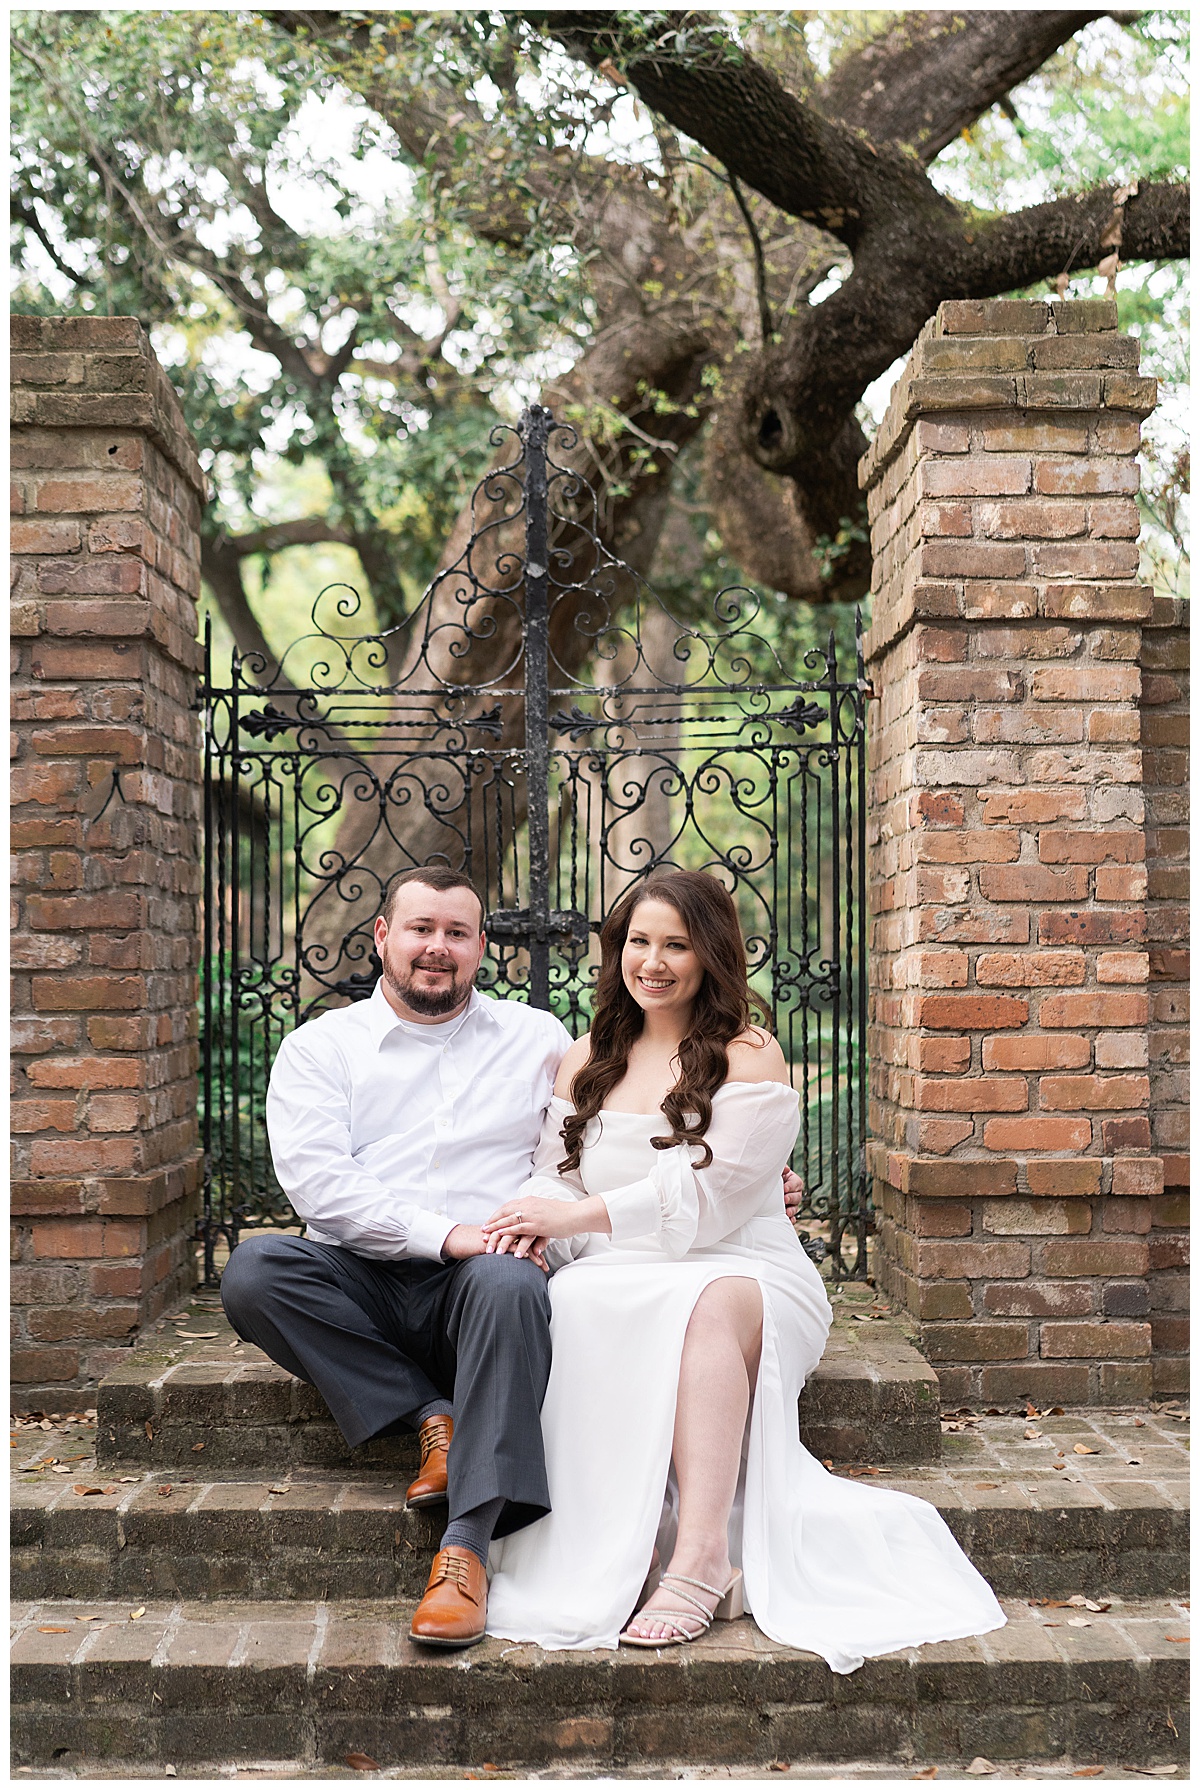 Man and woman sit close together during their Boulevard Oaks Engagement Session